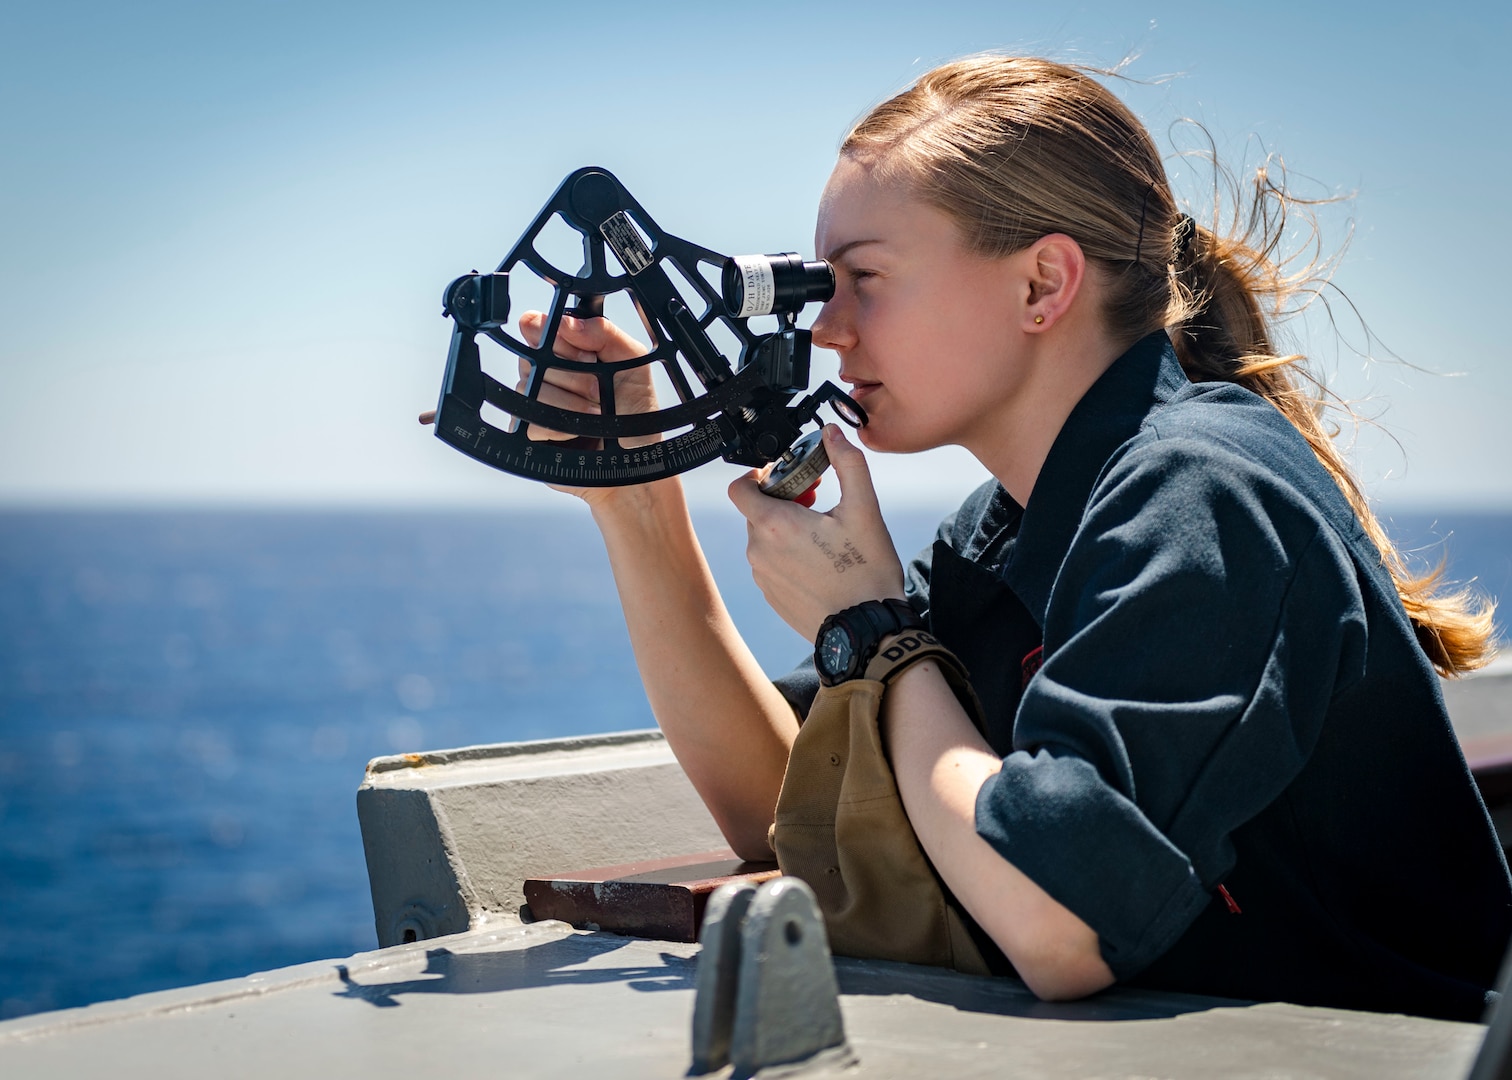 Sailor utilizes stadimeter on bridge wing aboard USS McCampbell prior to replenishment-at-sea with USNS Carl Brashear, South China Sea, March 12, 2020 (U.S. Navy/Markus Castaneda)